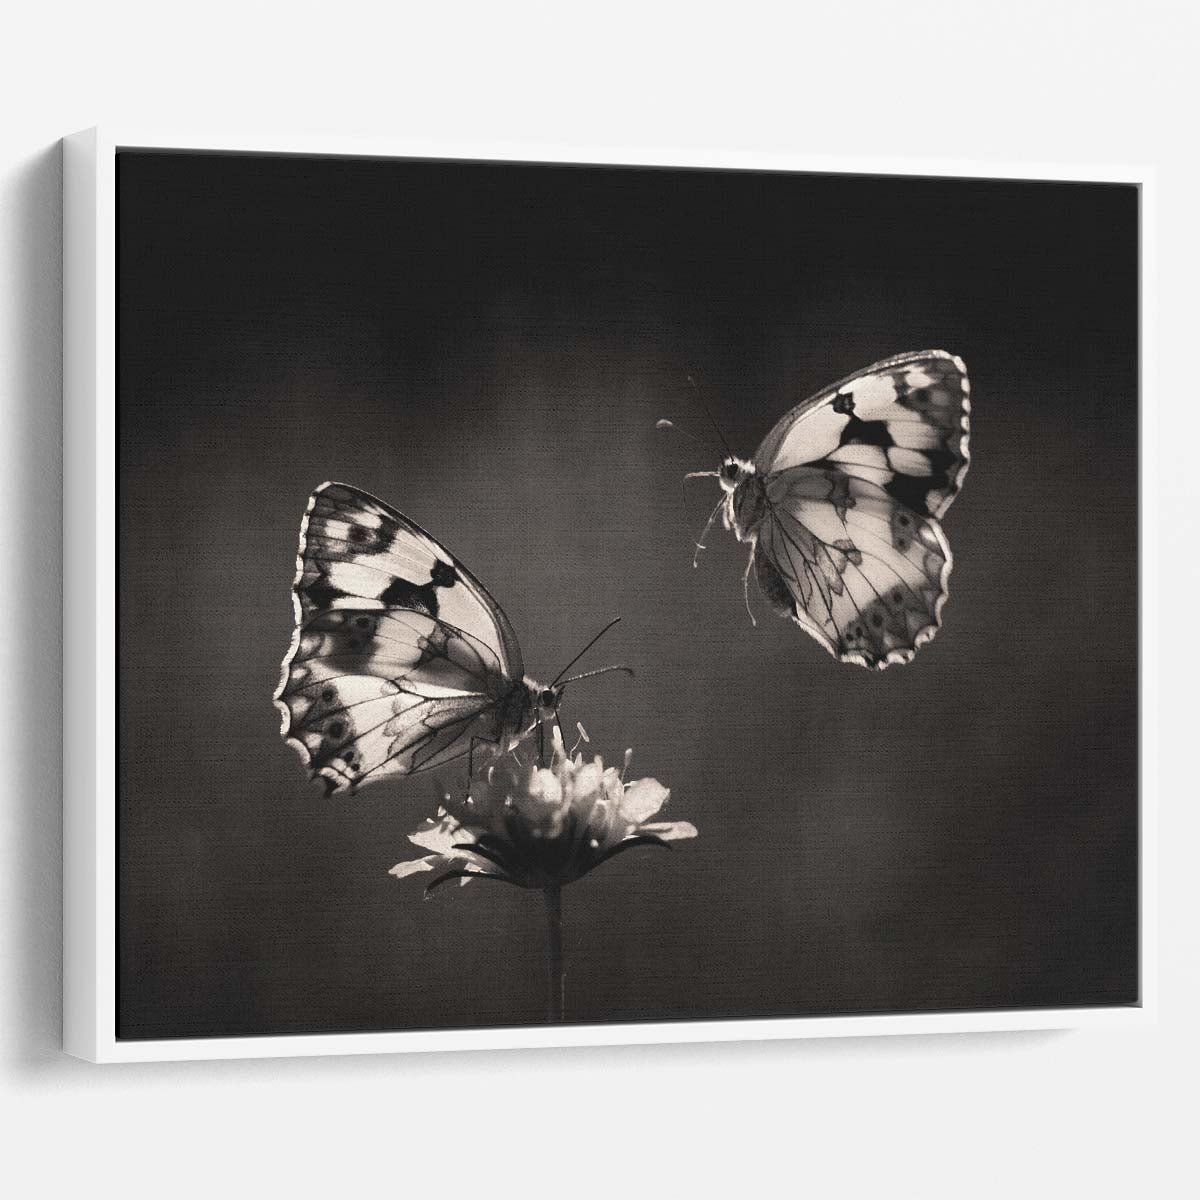 Romantic Butterfly Pair in Sepia Floral Macro Wall Art by Luxuriance Designs. Made in USA.